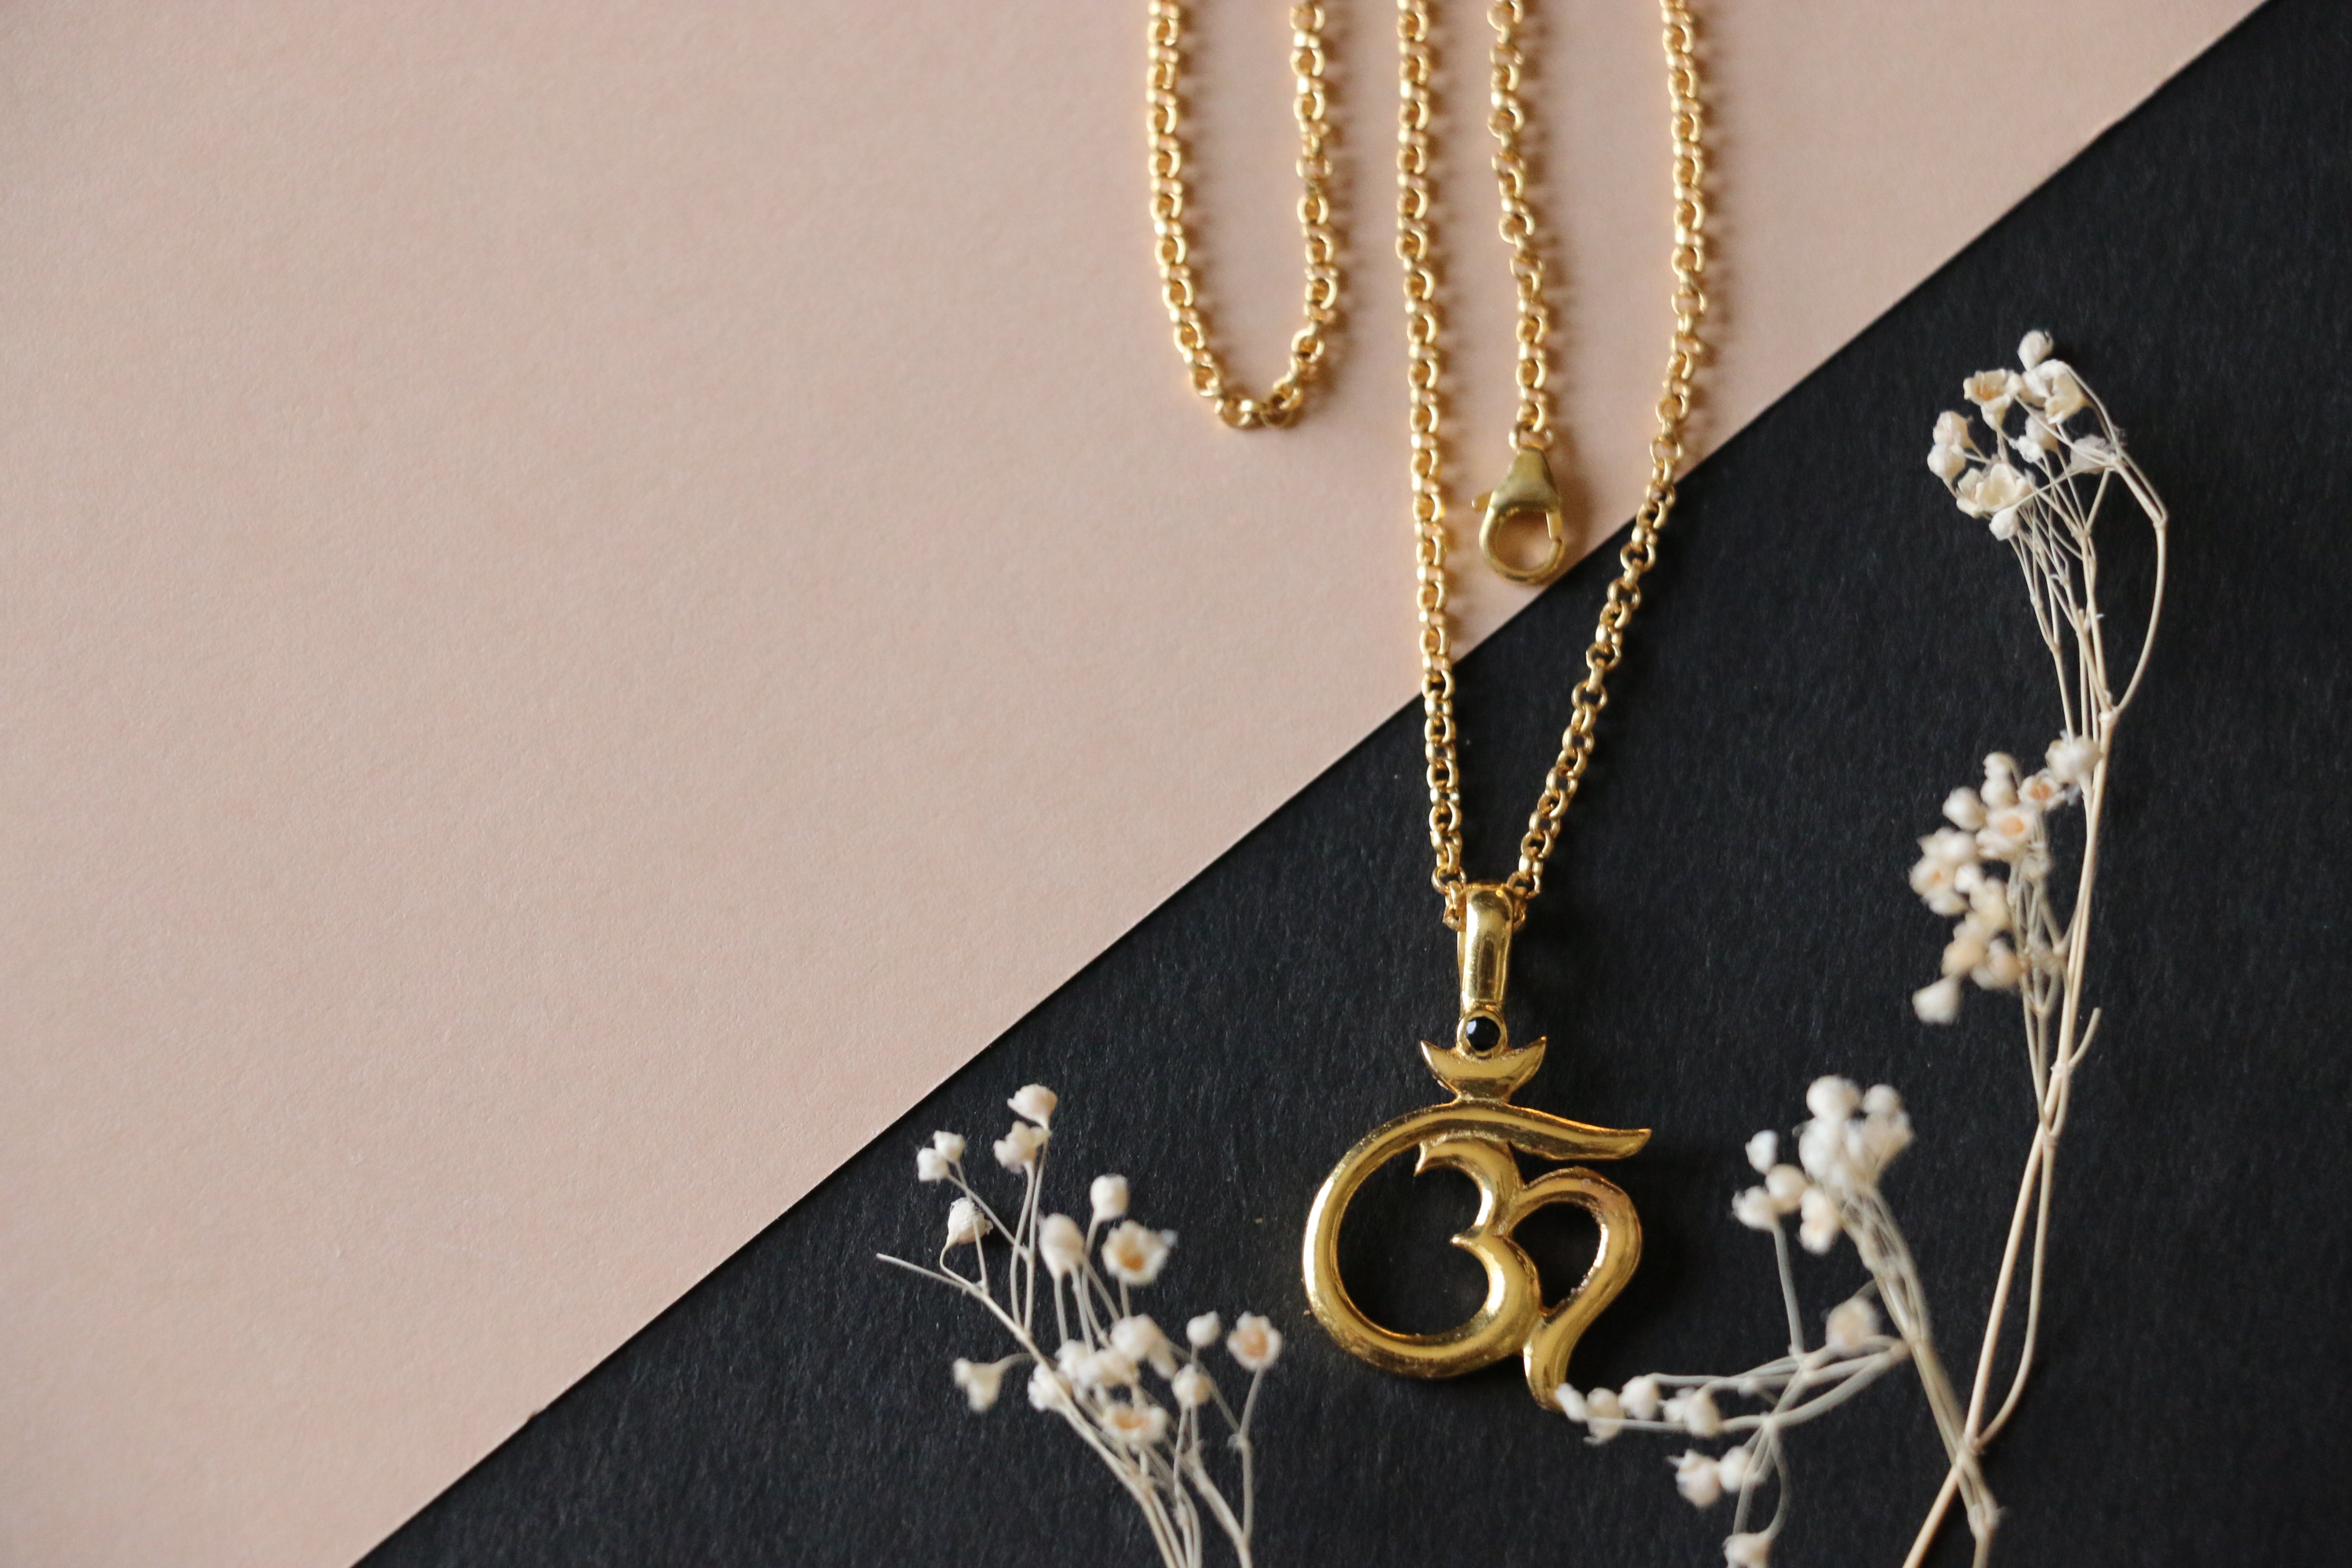 Om charm necklace